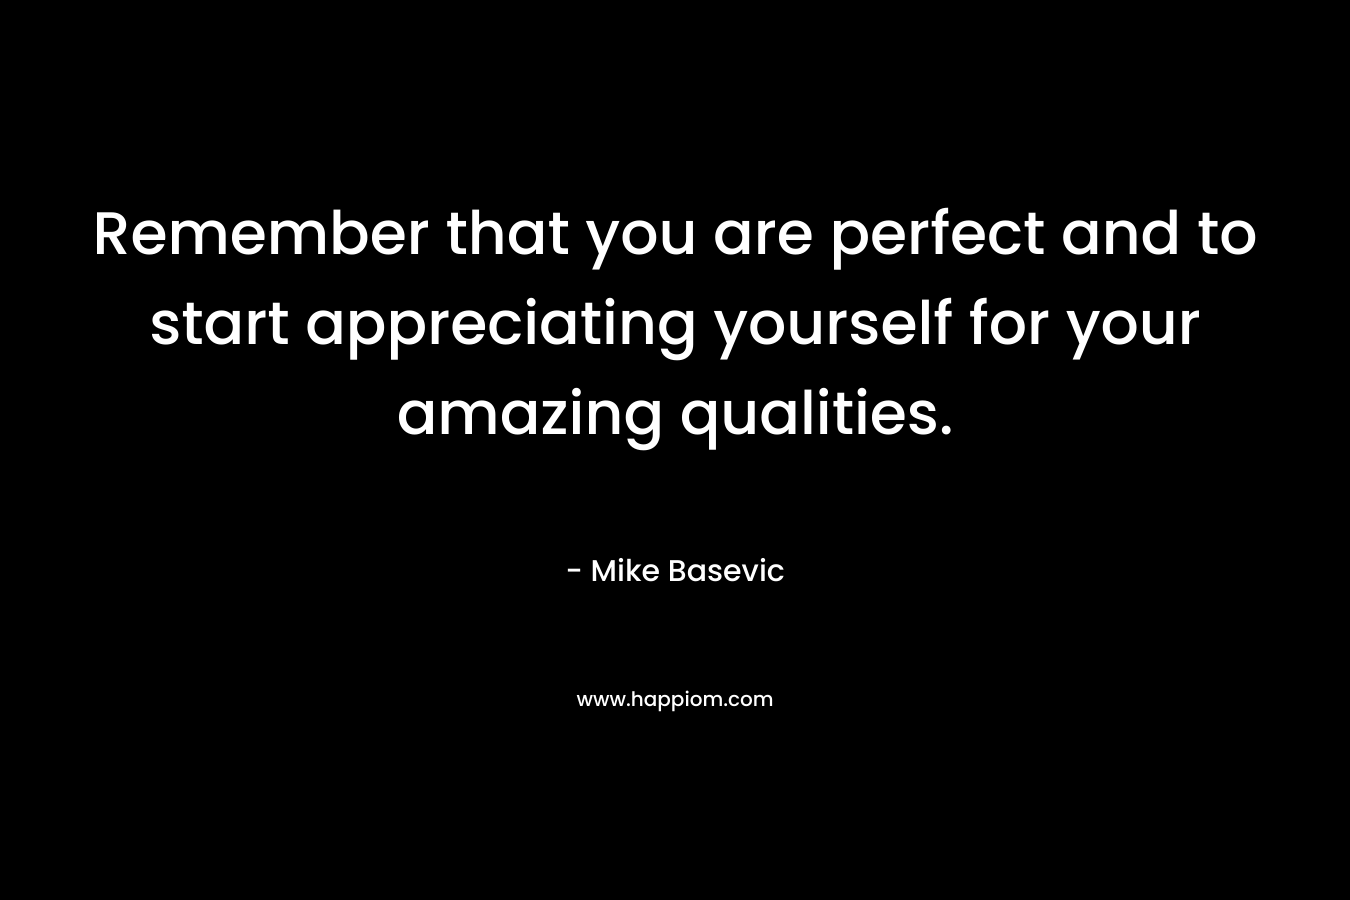 Remember that you are perfect and to start appreciating yourself for your amazing qualities.